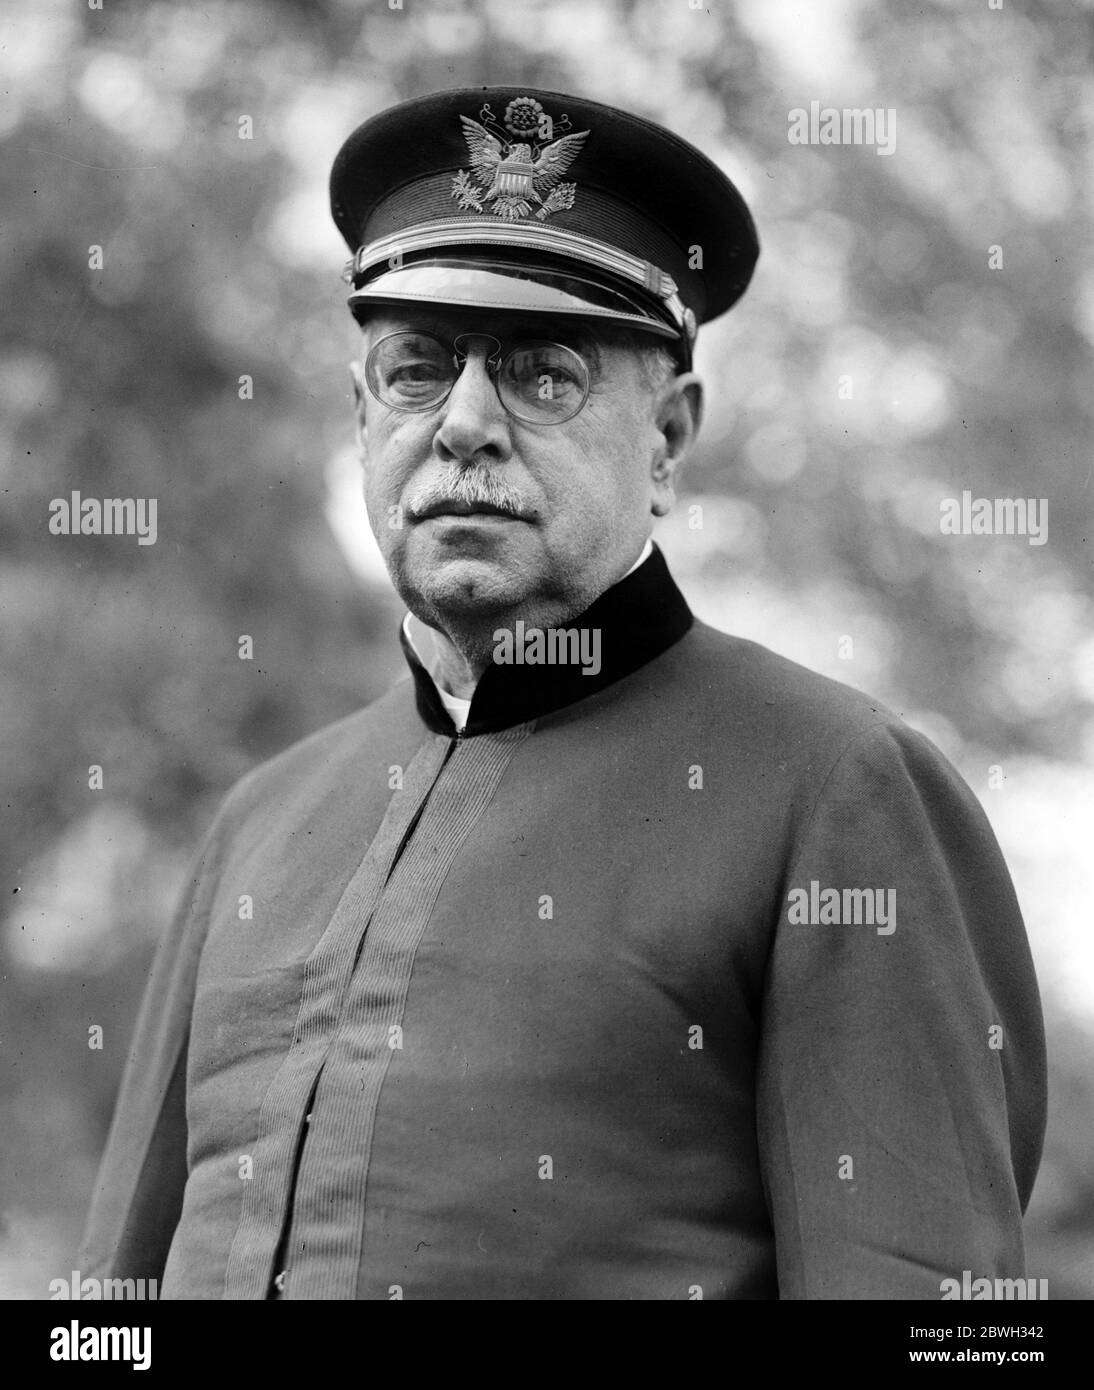 John Philip Sousa (1854 – 1932) American composer and conductor of the late Romantic era known primarily for American military marches. Stock Photo